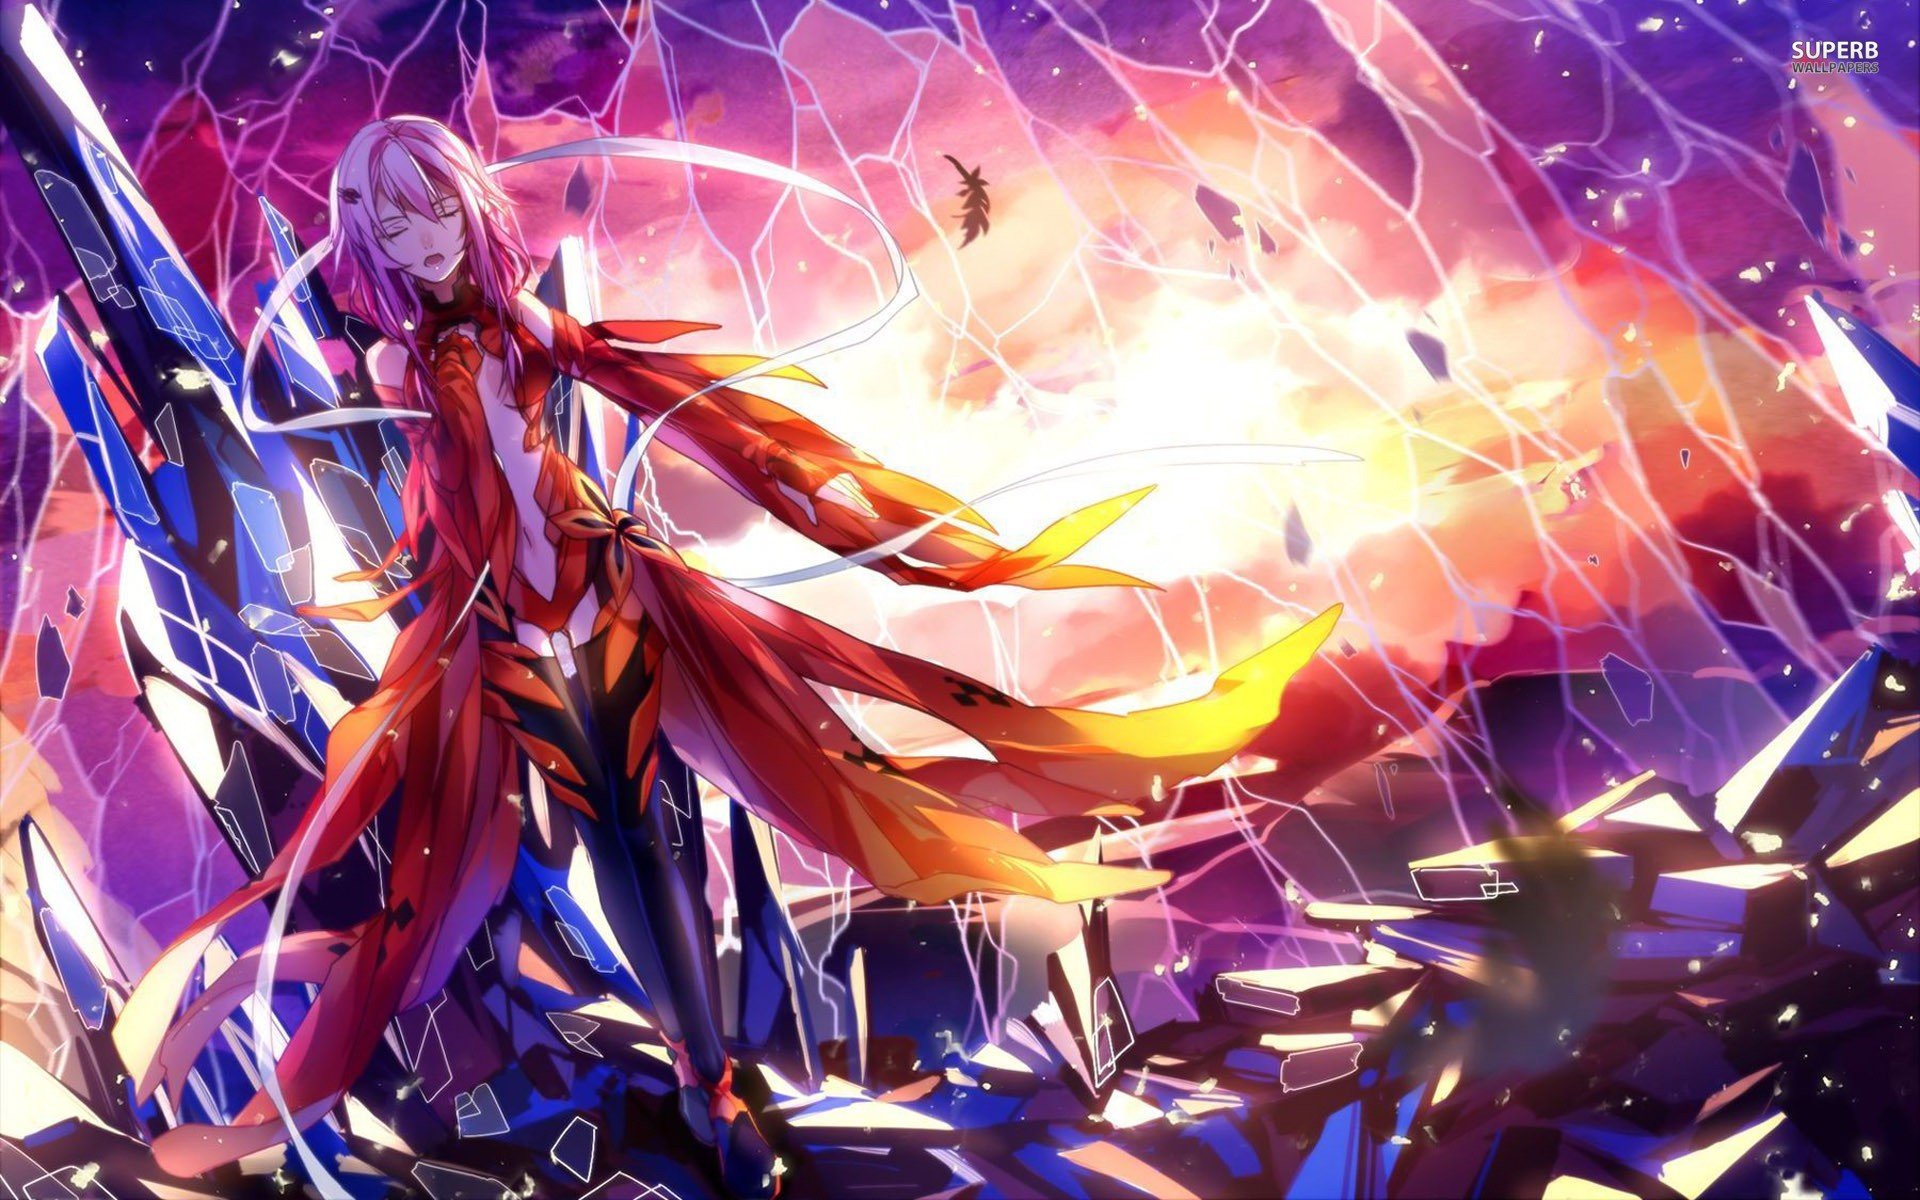 download guilty crown online for free